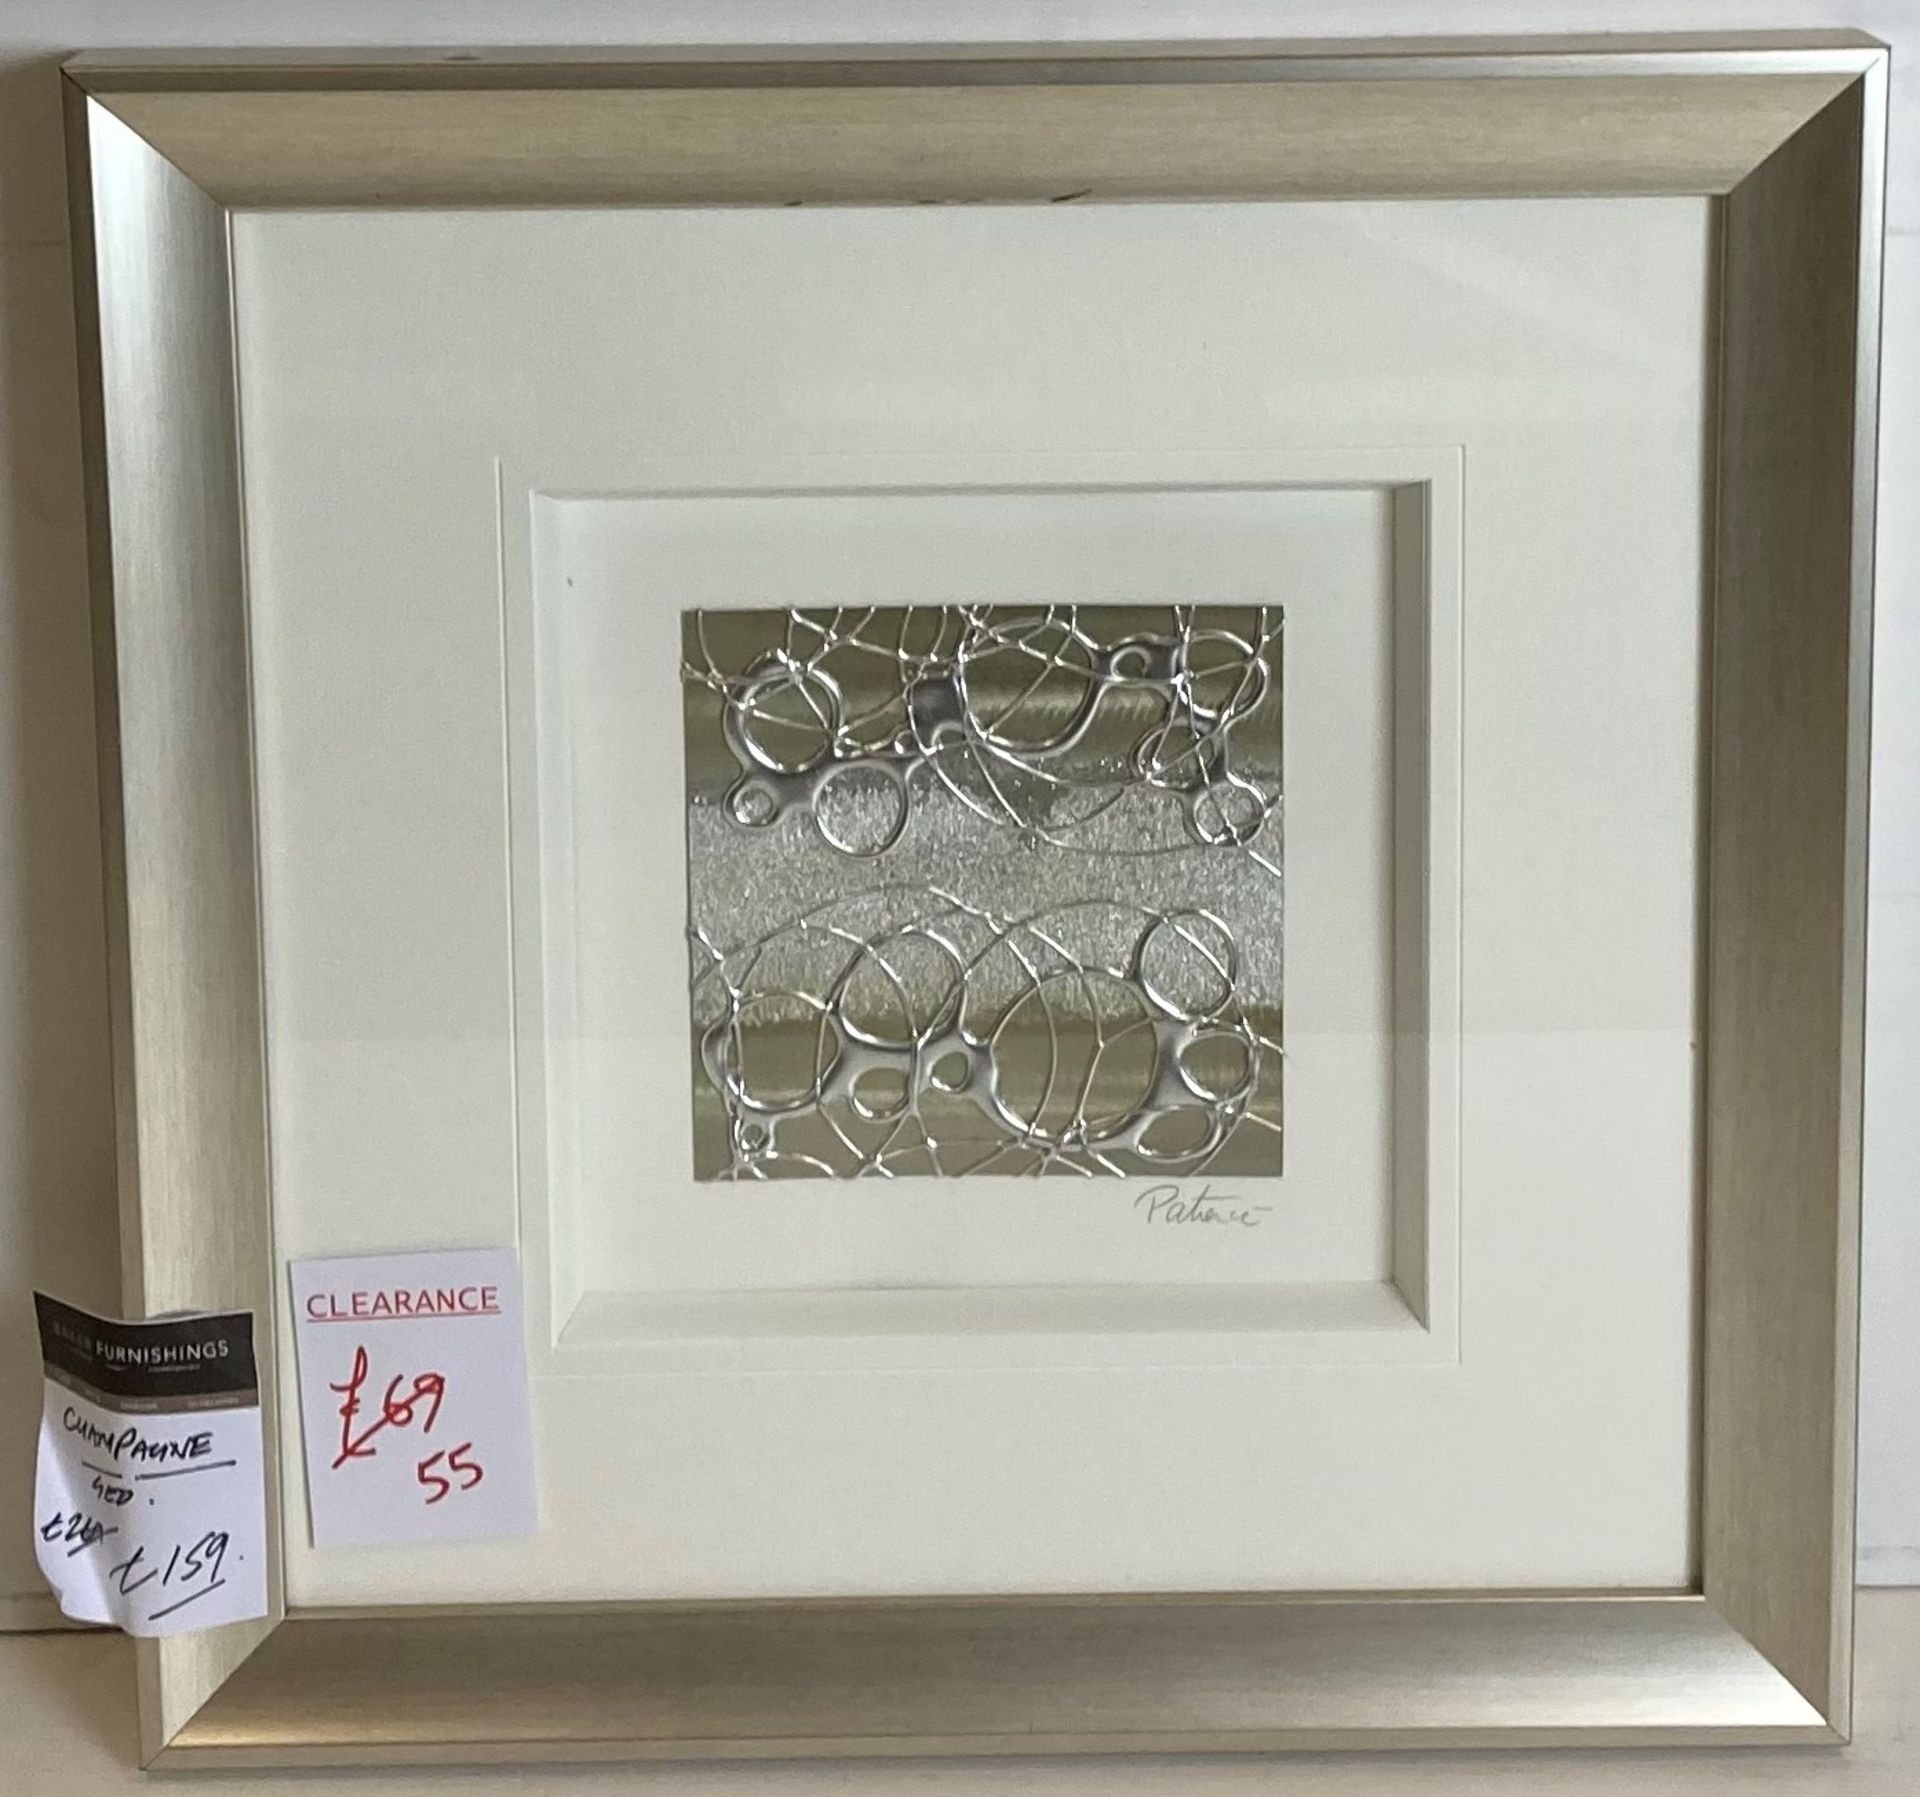 Marshall Arts frame print 'Champagne' in silvered frame, - Image 2 of 2